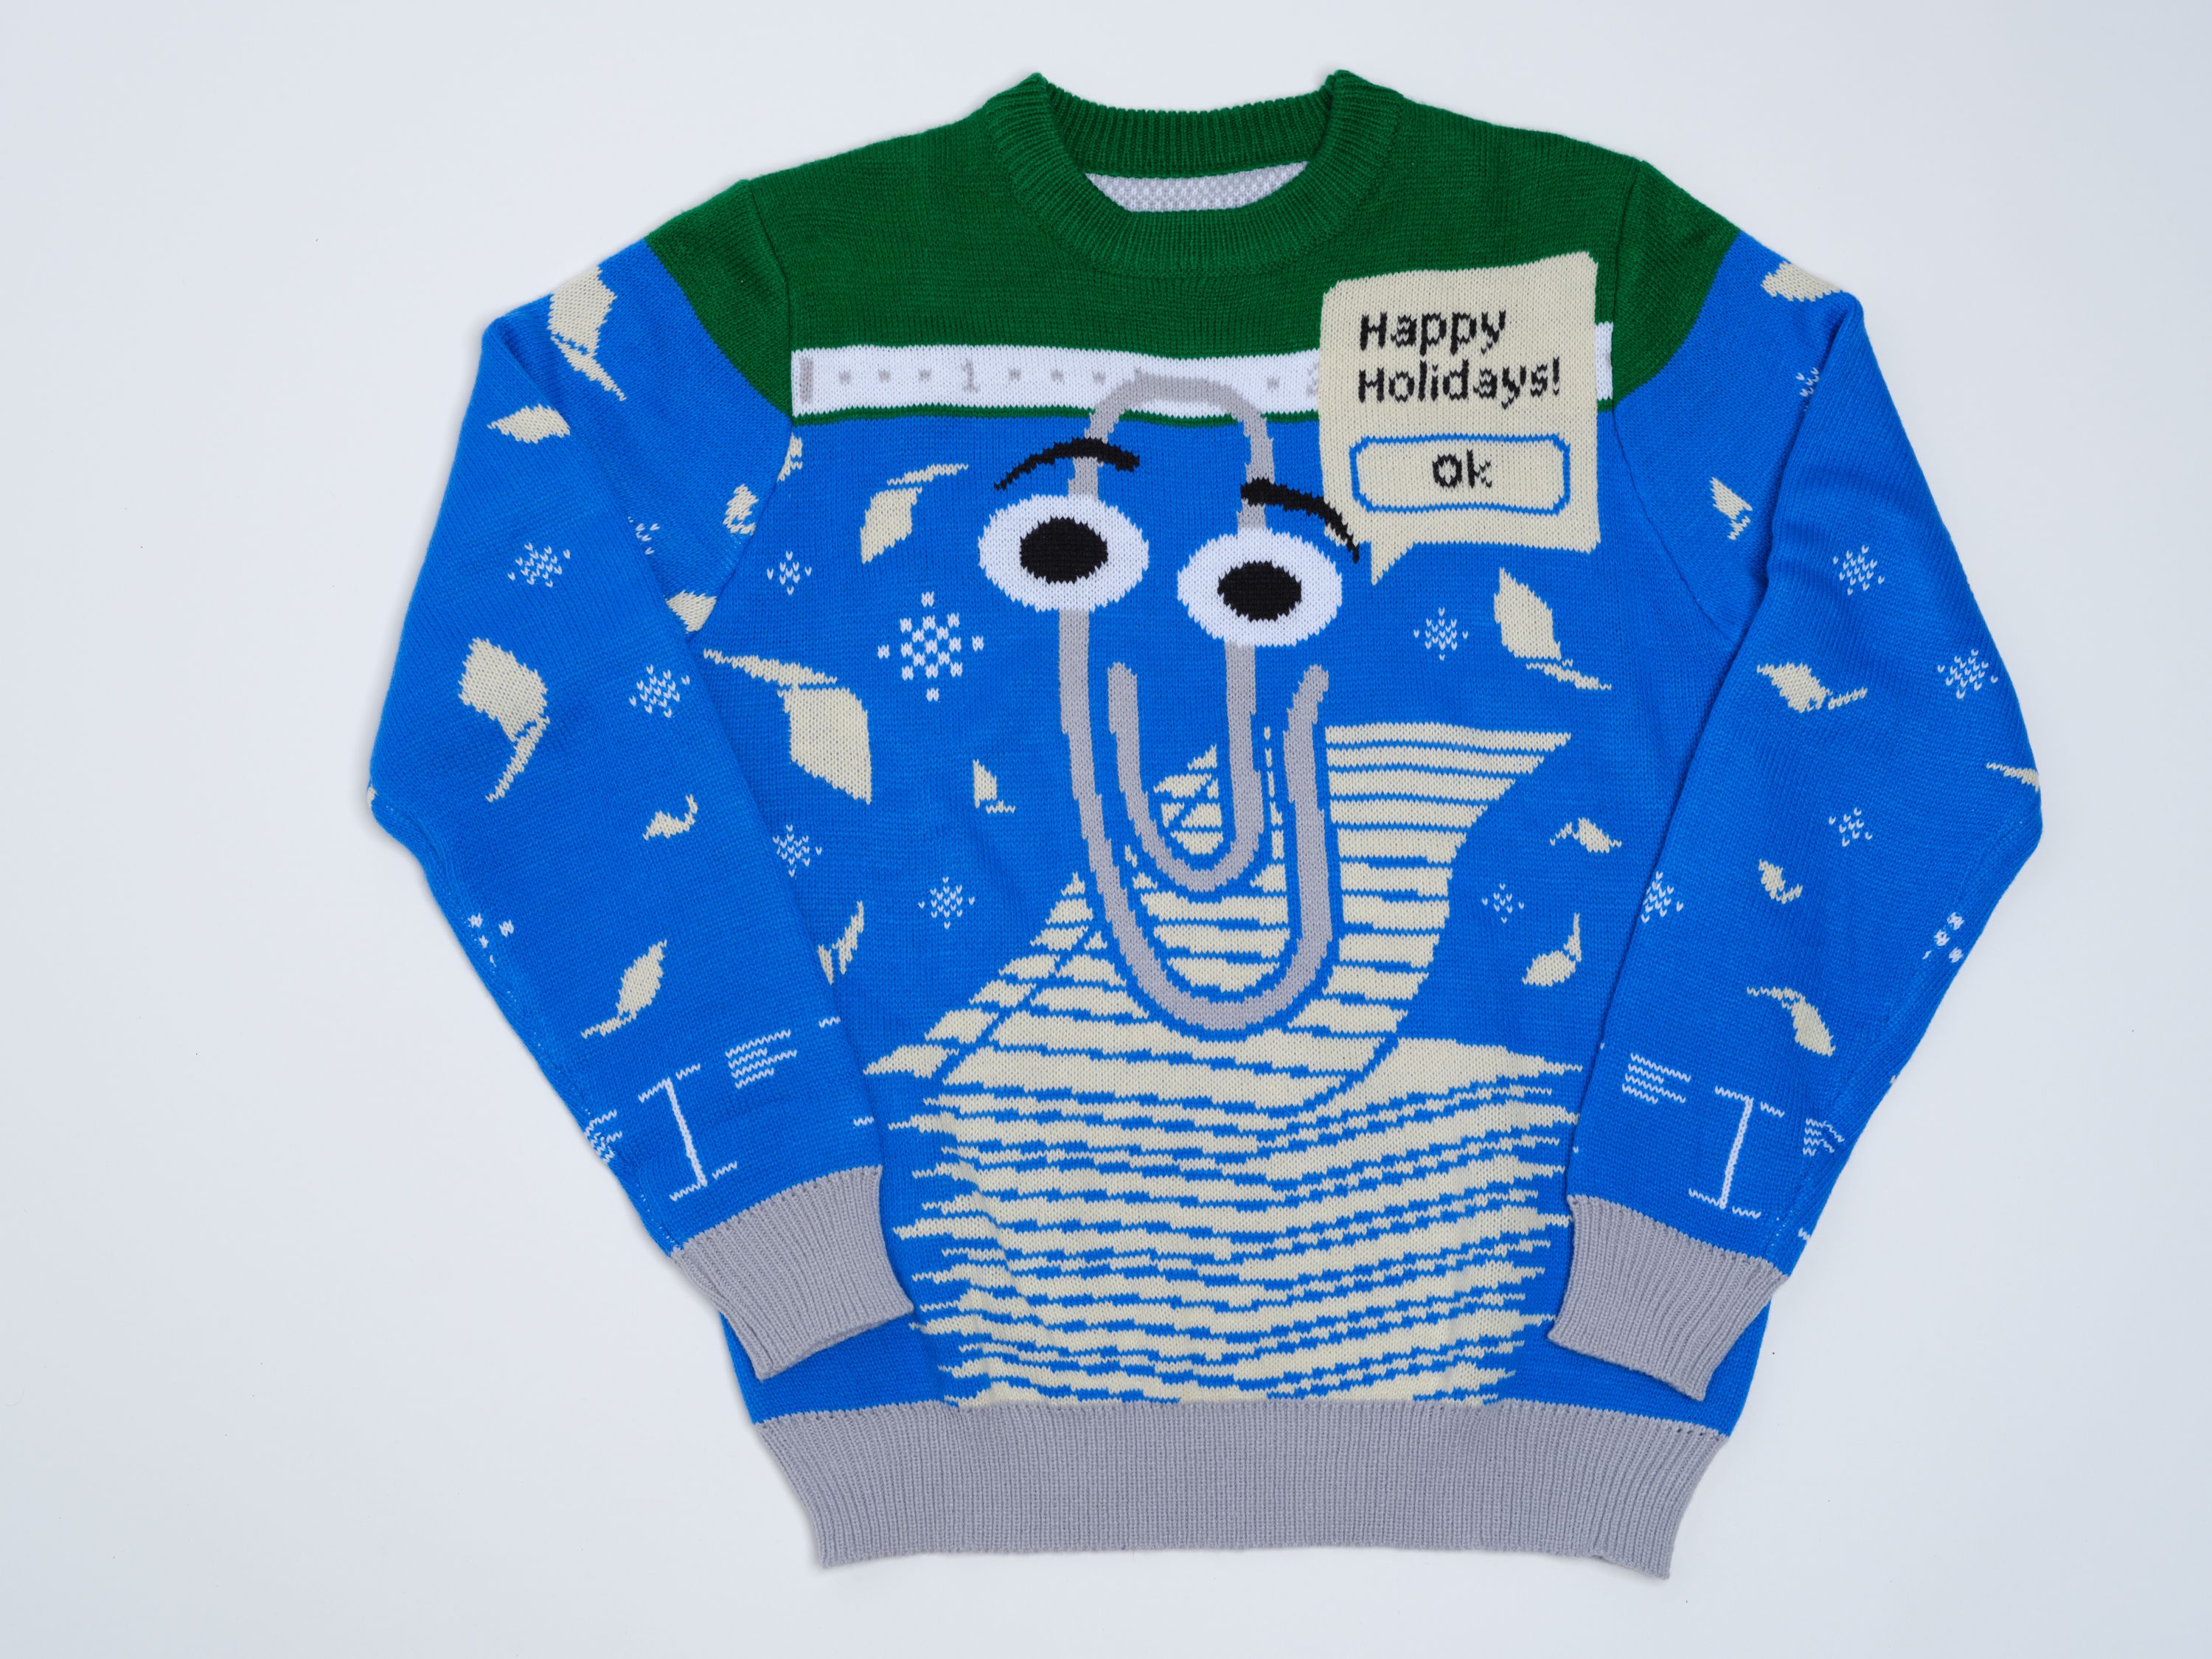 Blue and green sweater with Clippy on the front, saying Happy Holidays